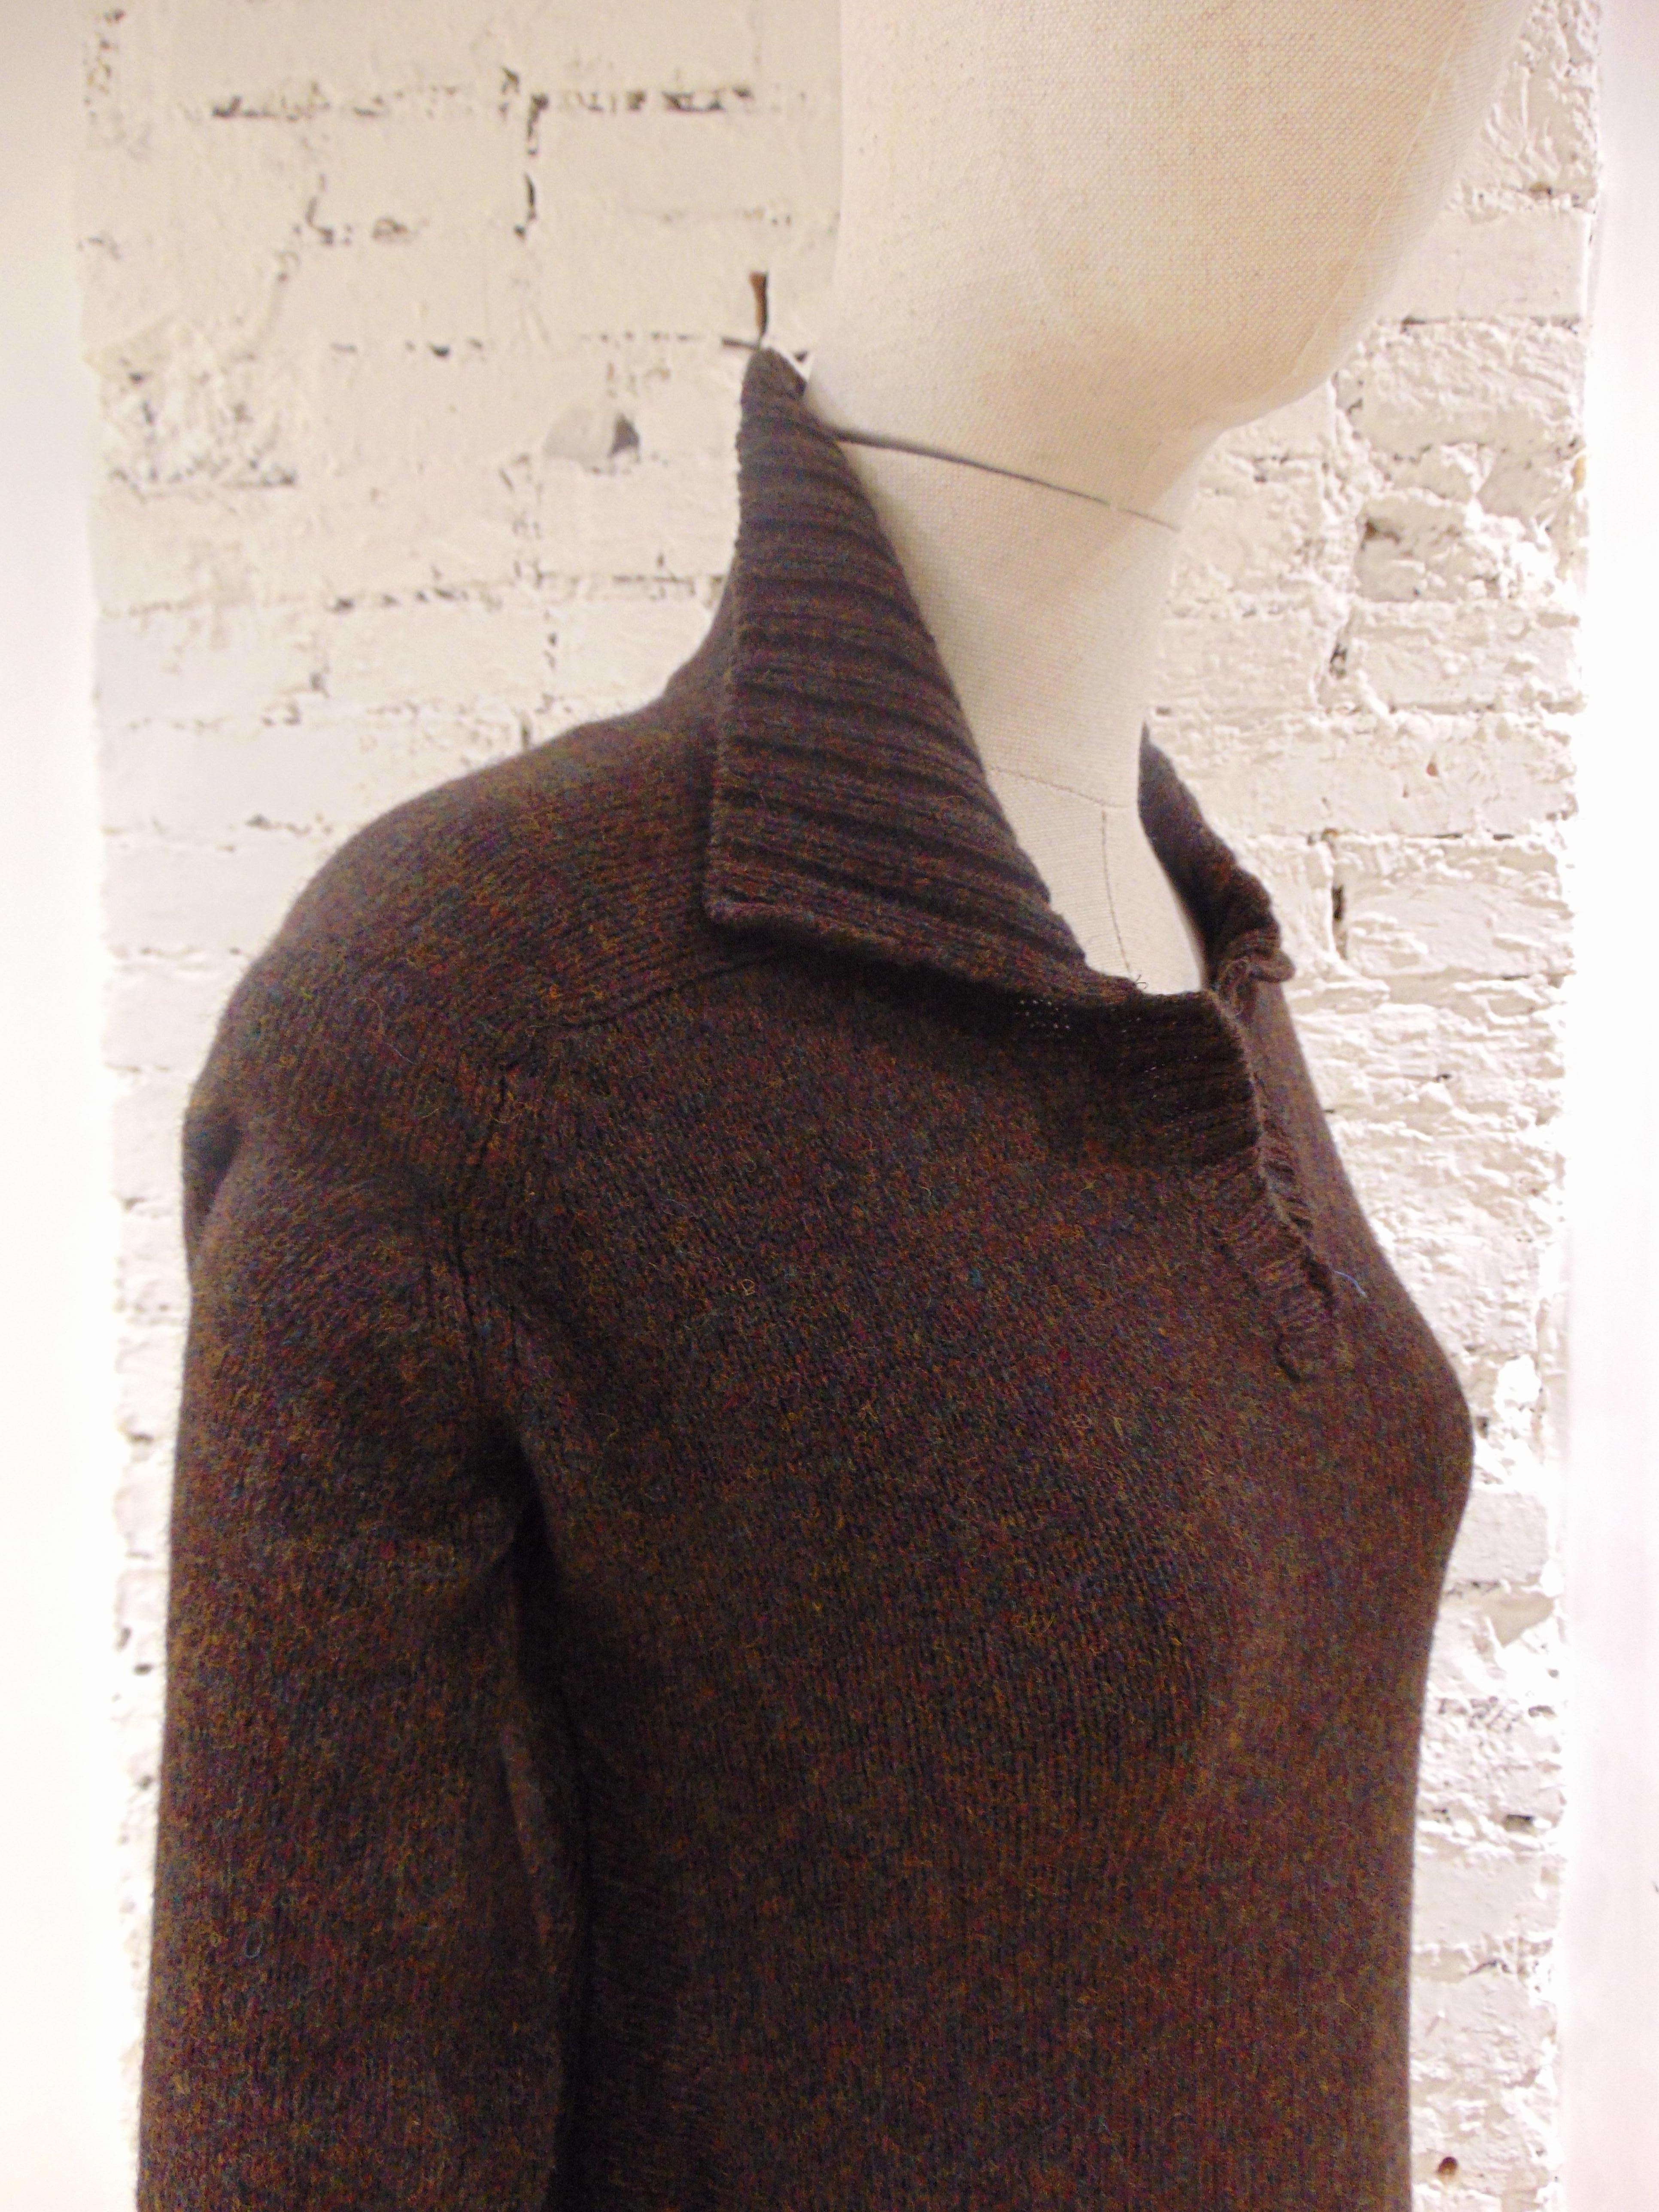 Balenciaga Brown Wool Dress NWOT

Brown Wool dress totally made in france, still with tags, size FR36 which corresponds to a IT 40